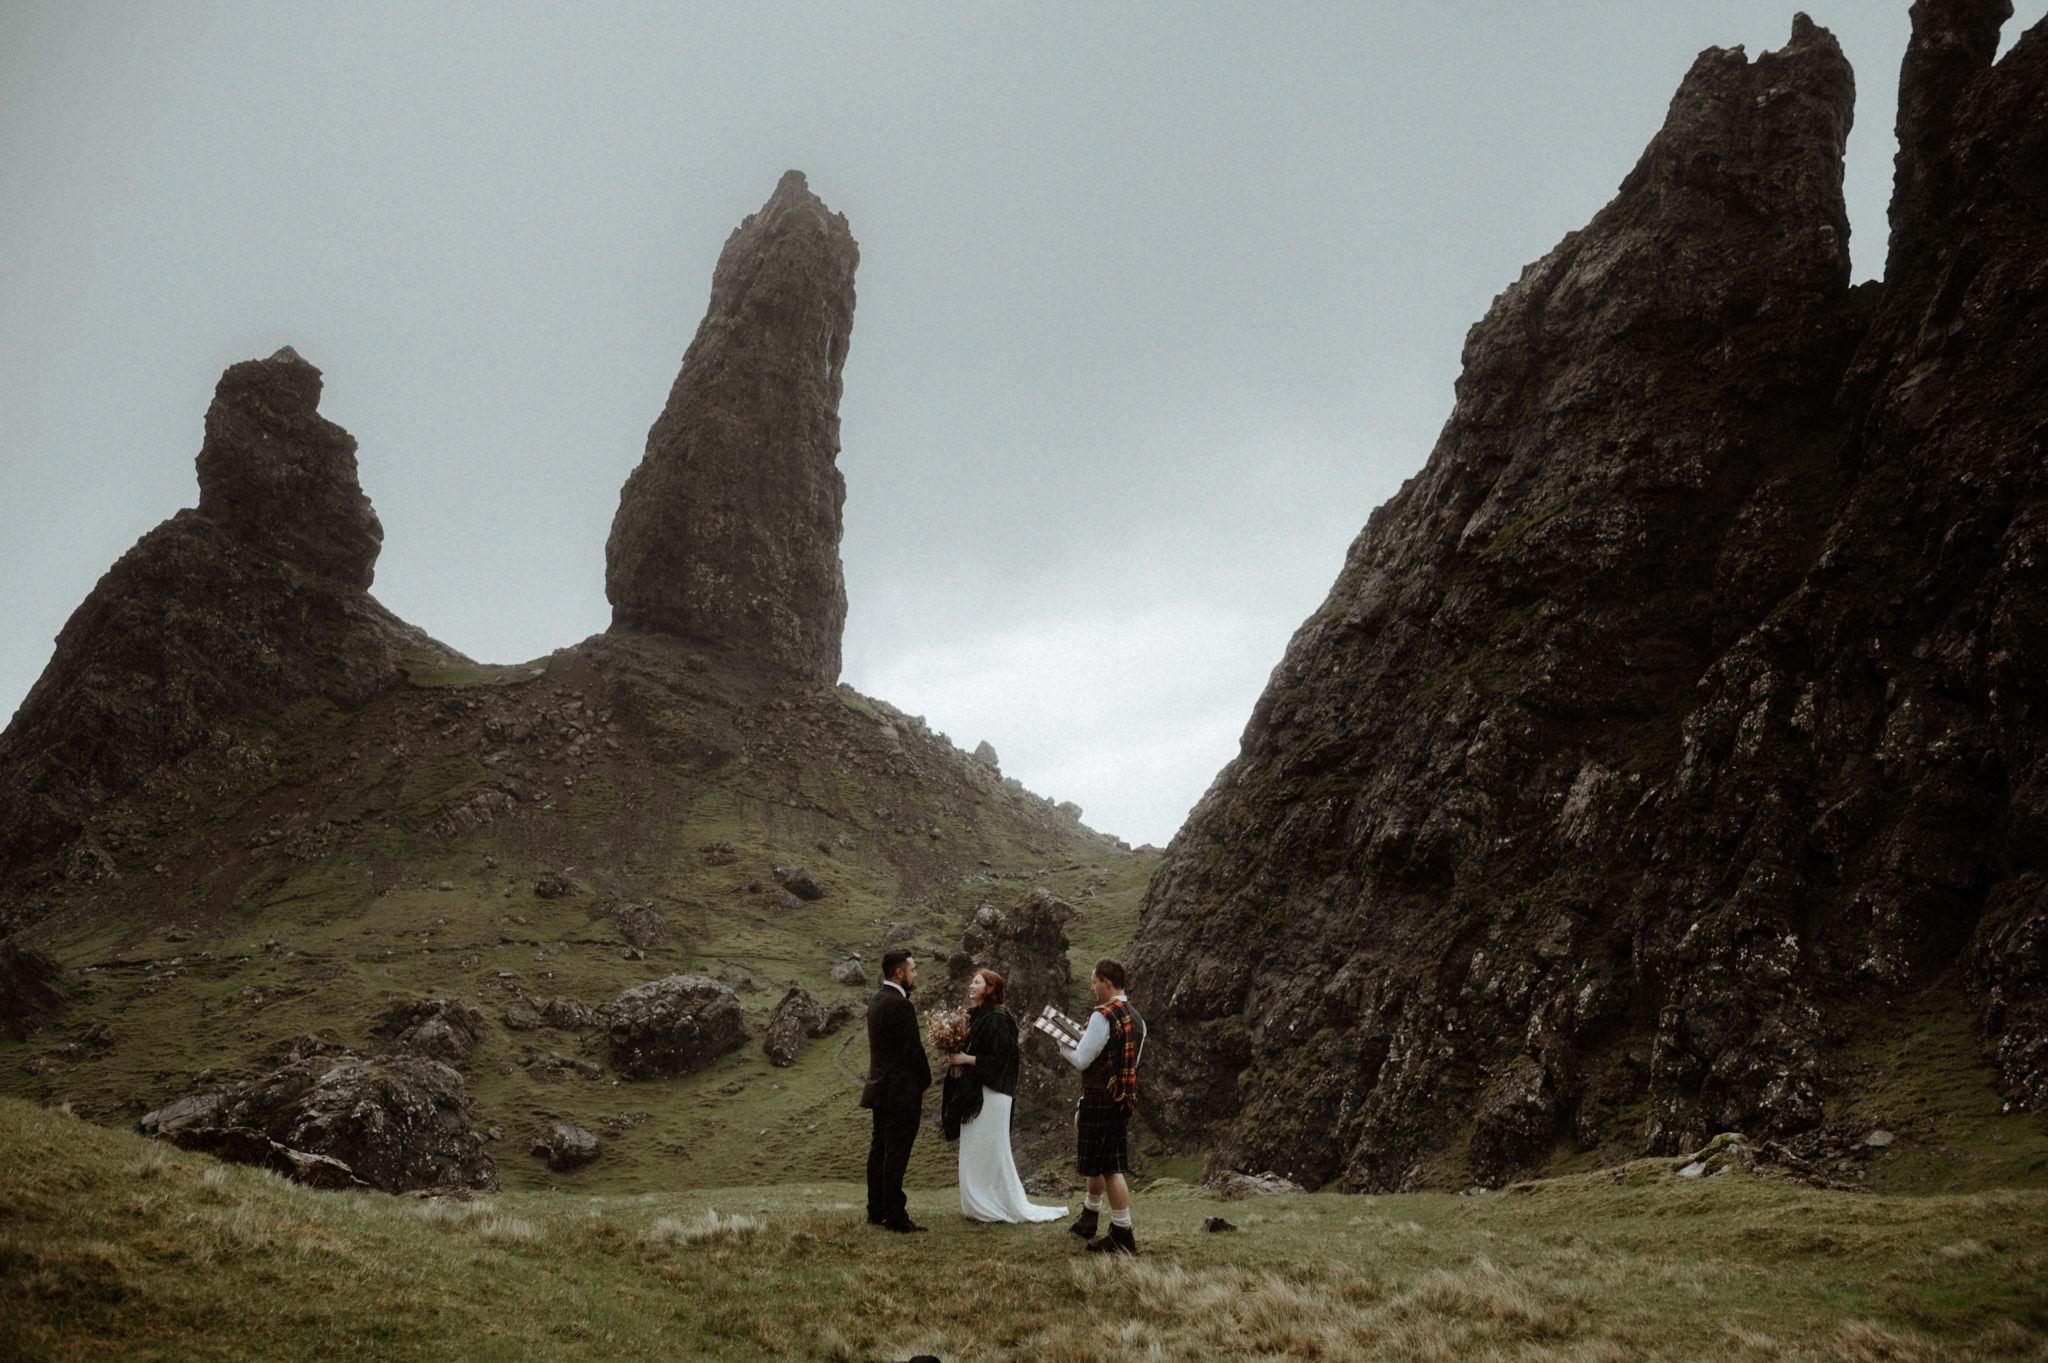 humanist celebrant Ashton Easter in Scotland conducting a ceremony on the Isle of Skye at the Old Man of Storr